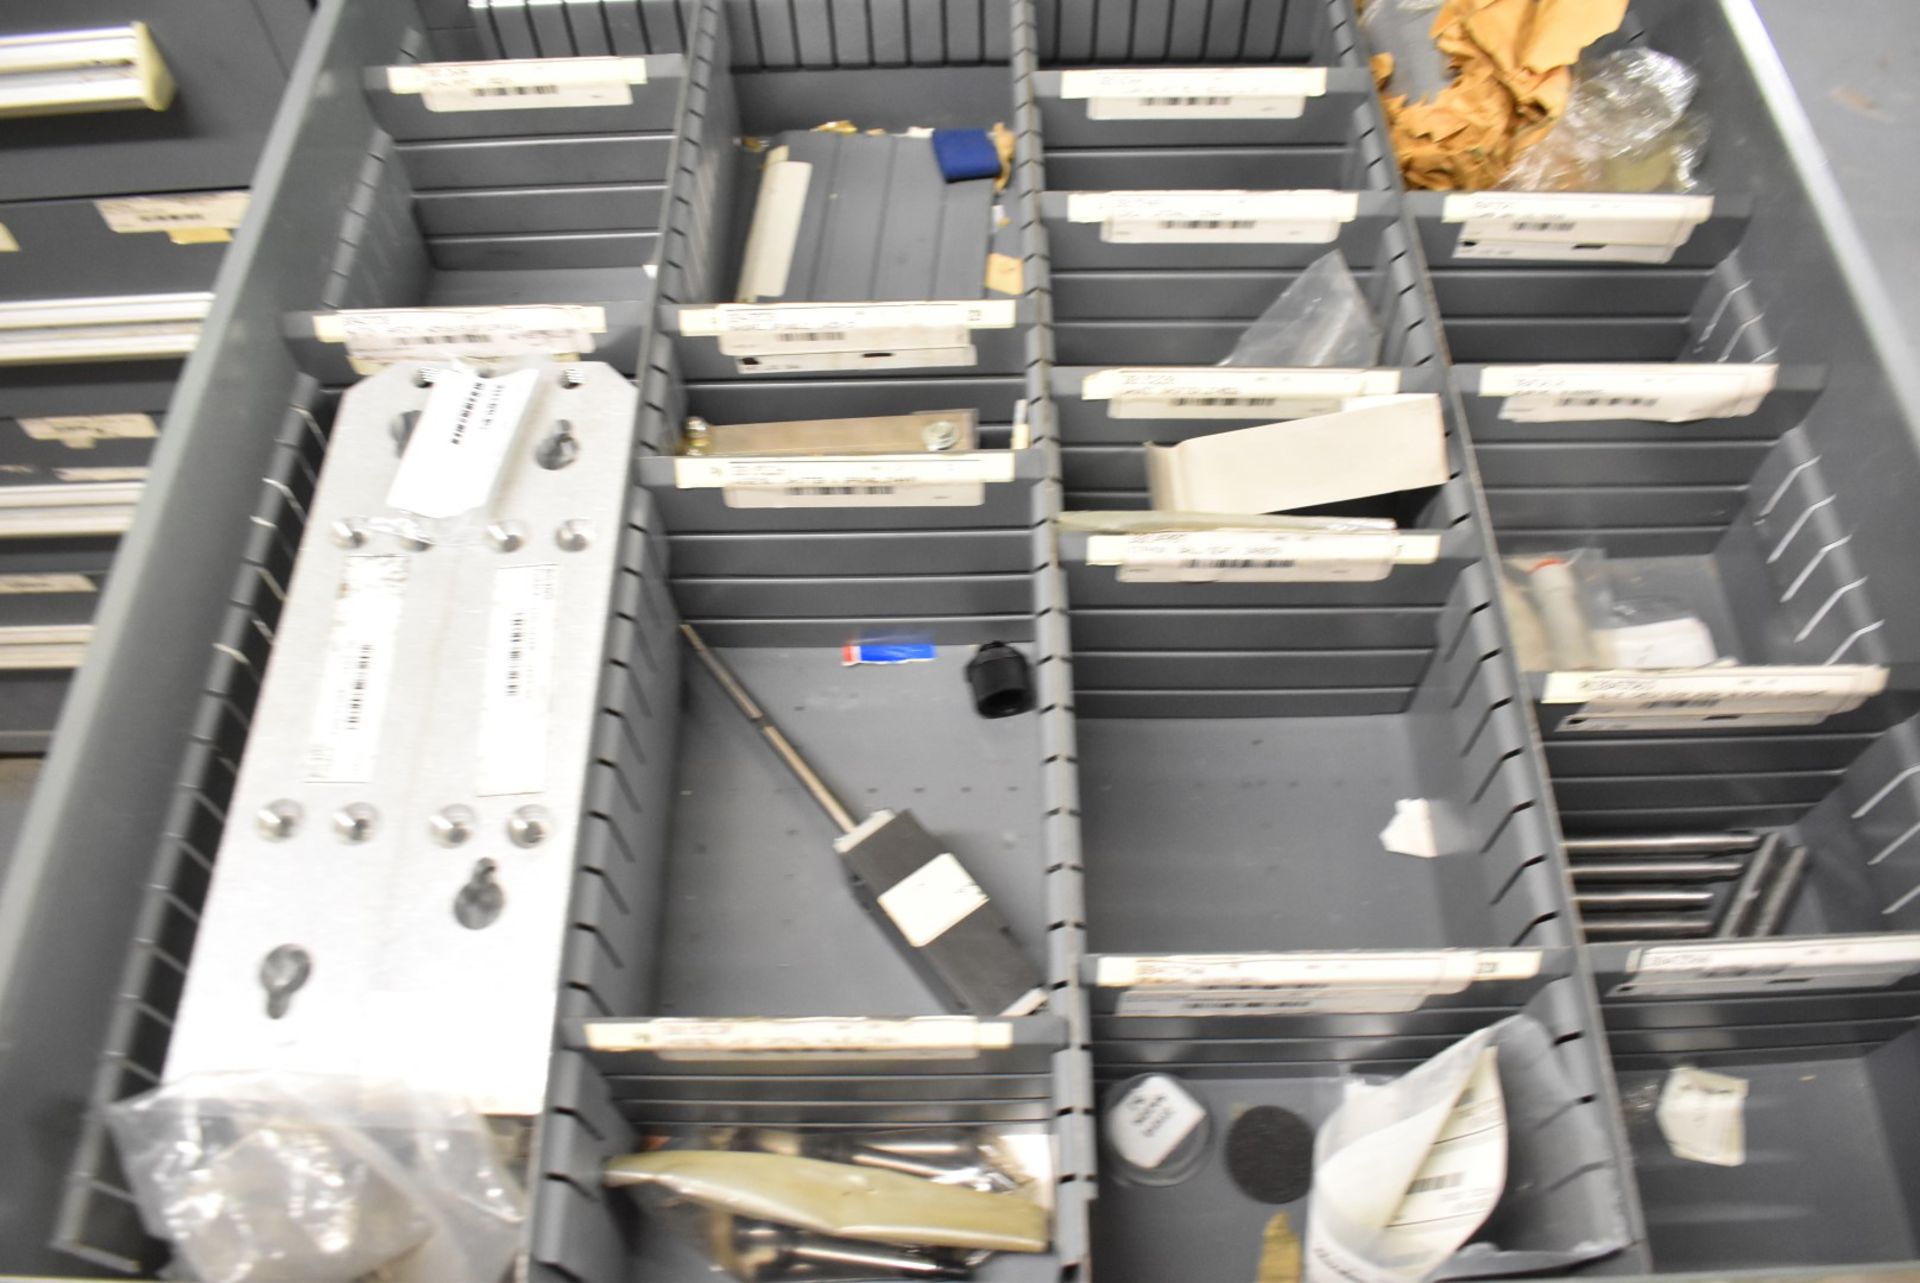 LOT/ CONTENTS OF CABINET - INCLUDING RELAYS, SPRINGS, TIMING BELTS, AUTOMATION COMPONENTS, - Image 5 of 6